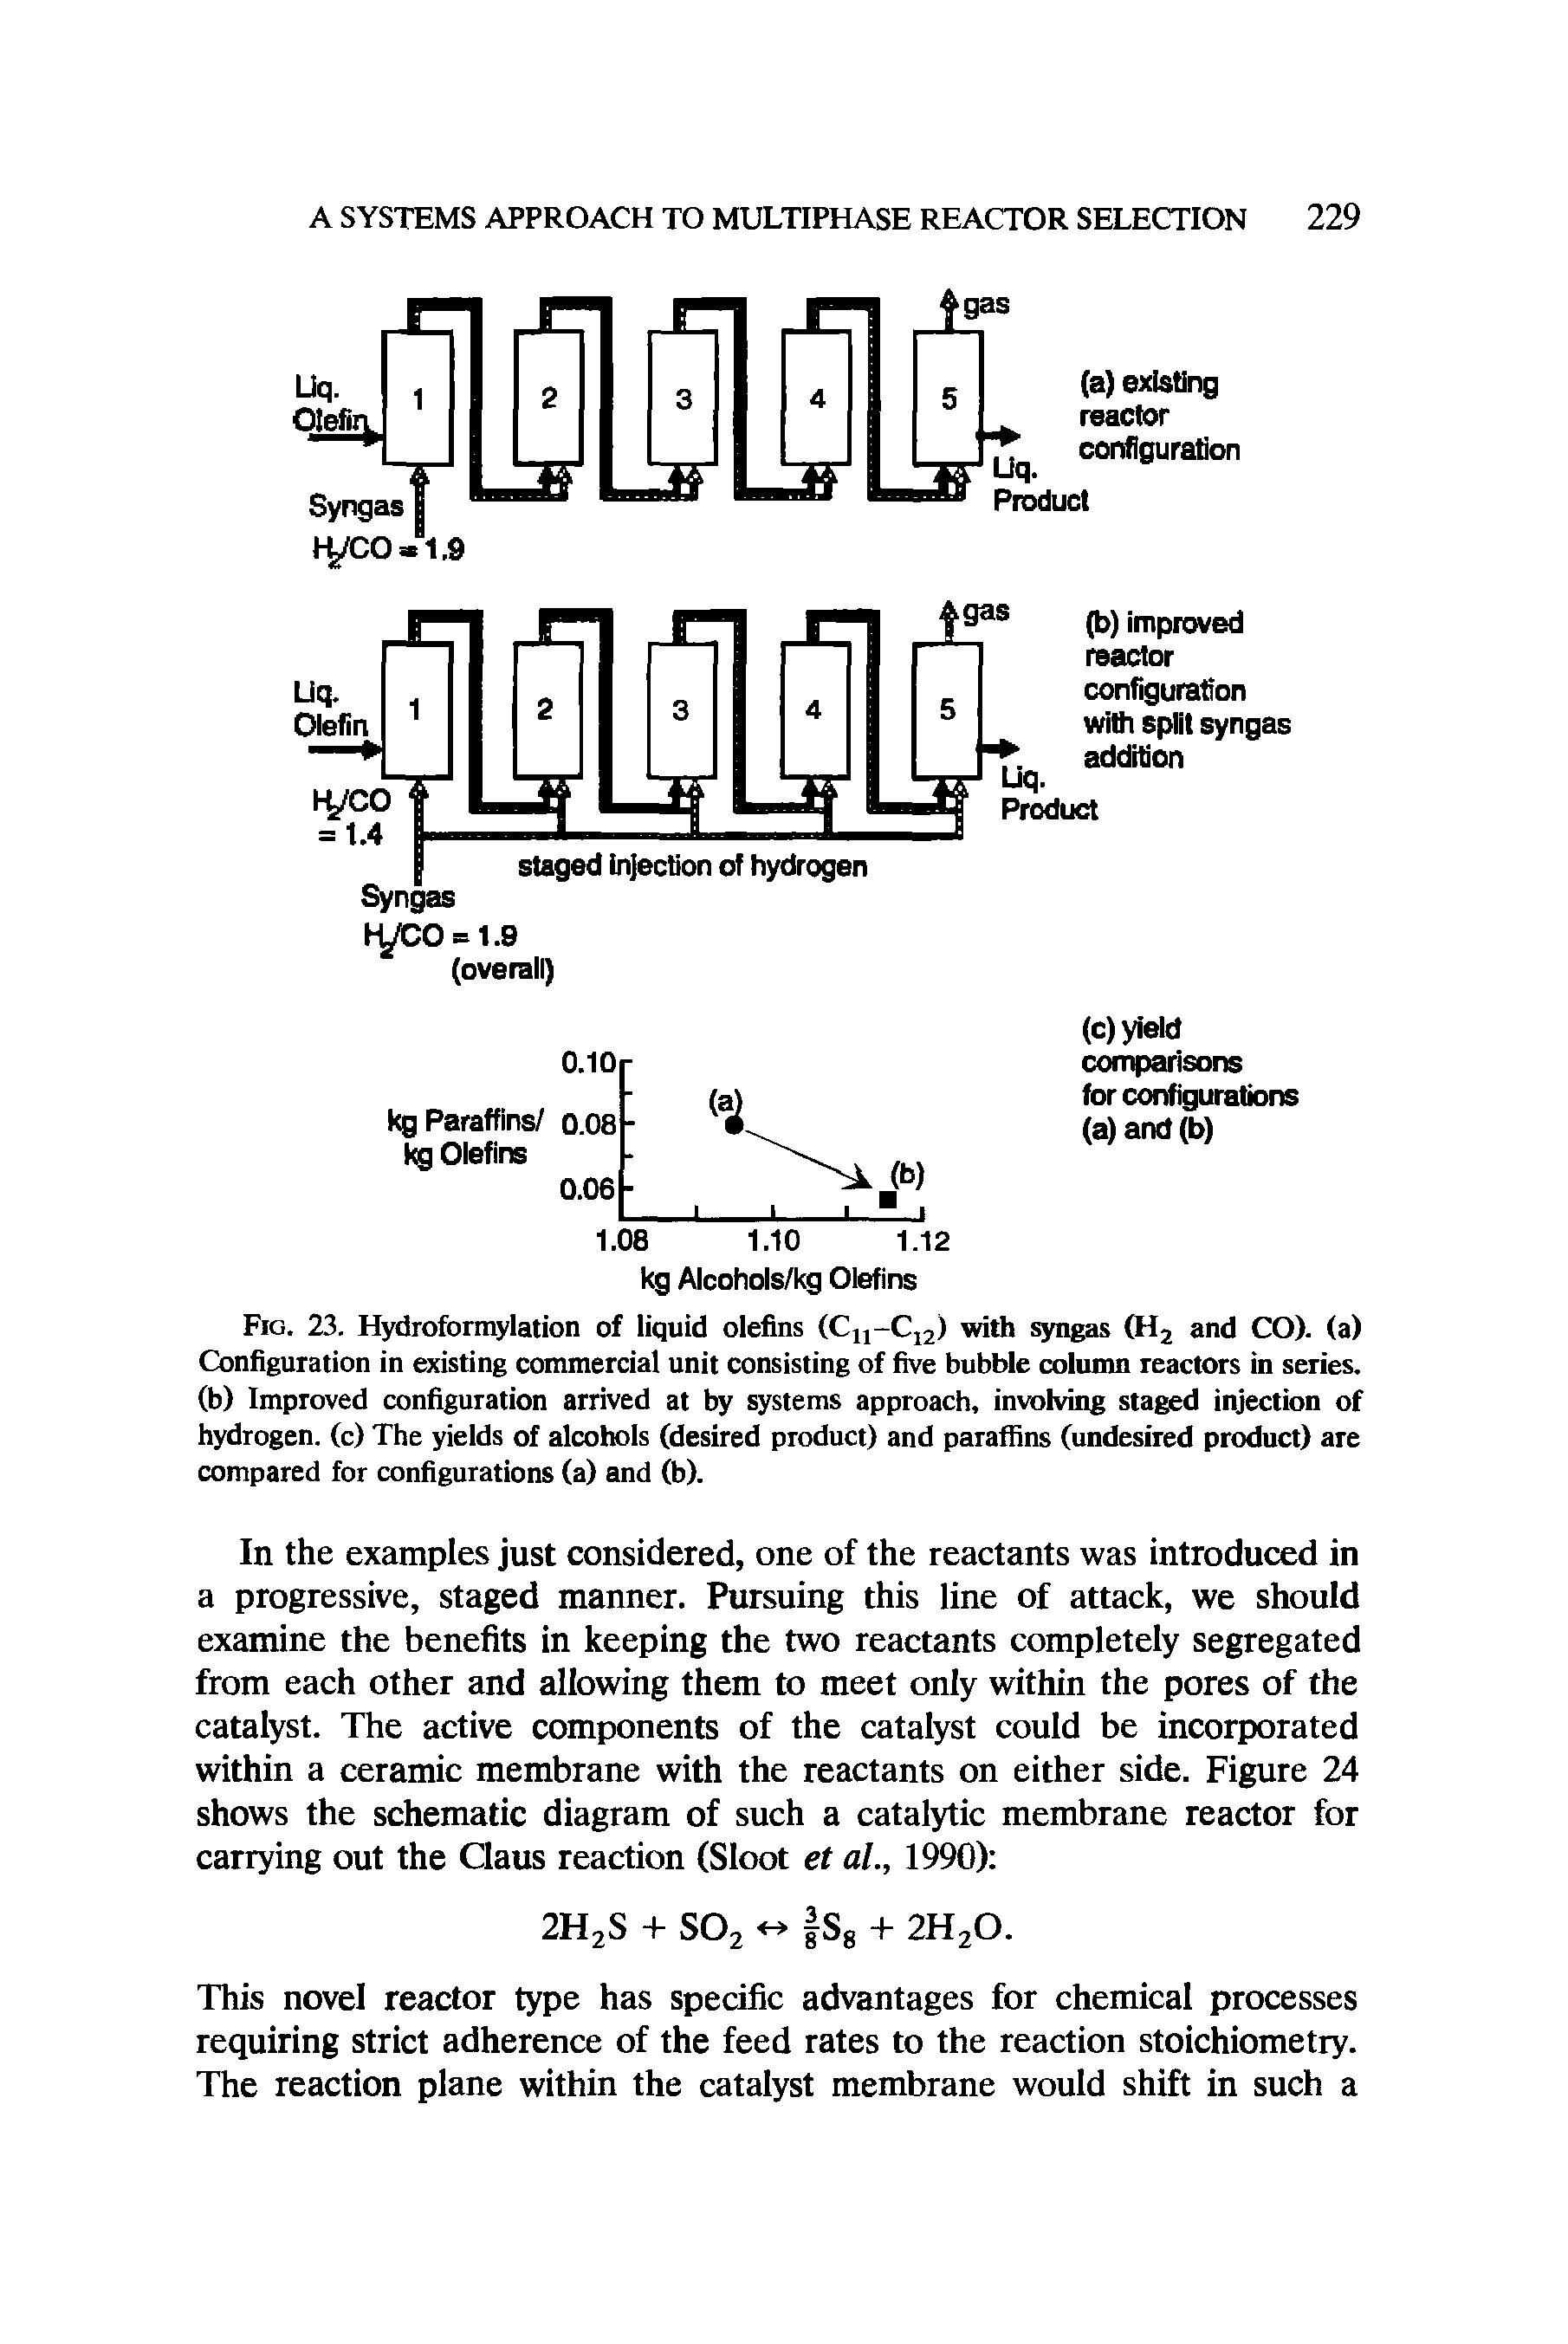 Fig. 23. Hydroformylation of liquid olefins (Cn-C12) with syngas (H2 and CO), (a) Configuration in existing commercial unit consisting of five bubble column reactors in series, (b) Improved configuration arrived at by systems approach, involving staged injection of hydrogen, (c) The yields of alcohols (desired product) and paraffins (undesired product) are compared for configurations (a) and (b).